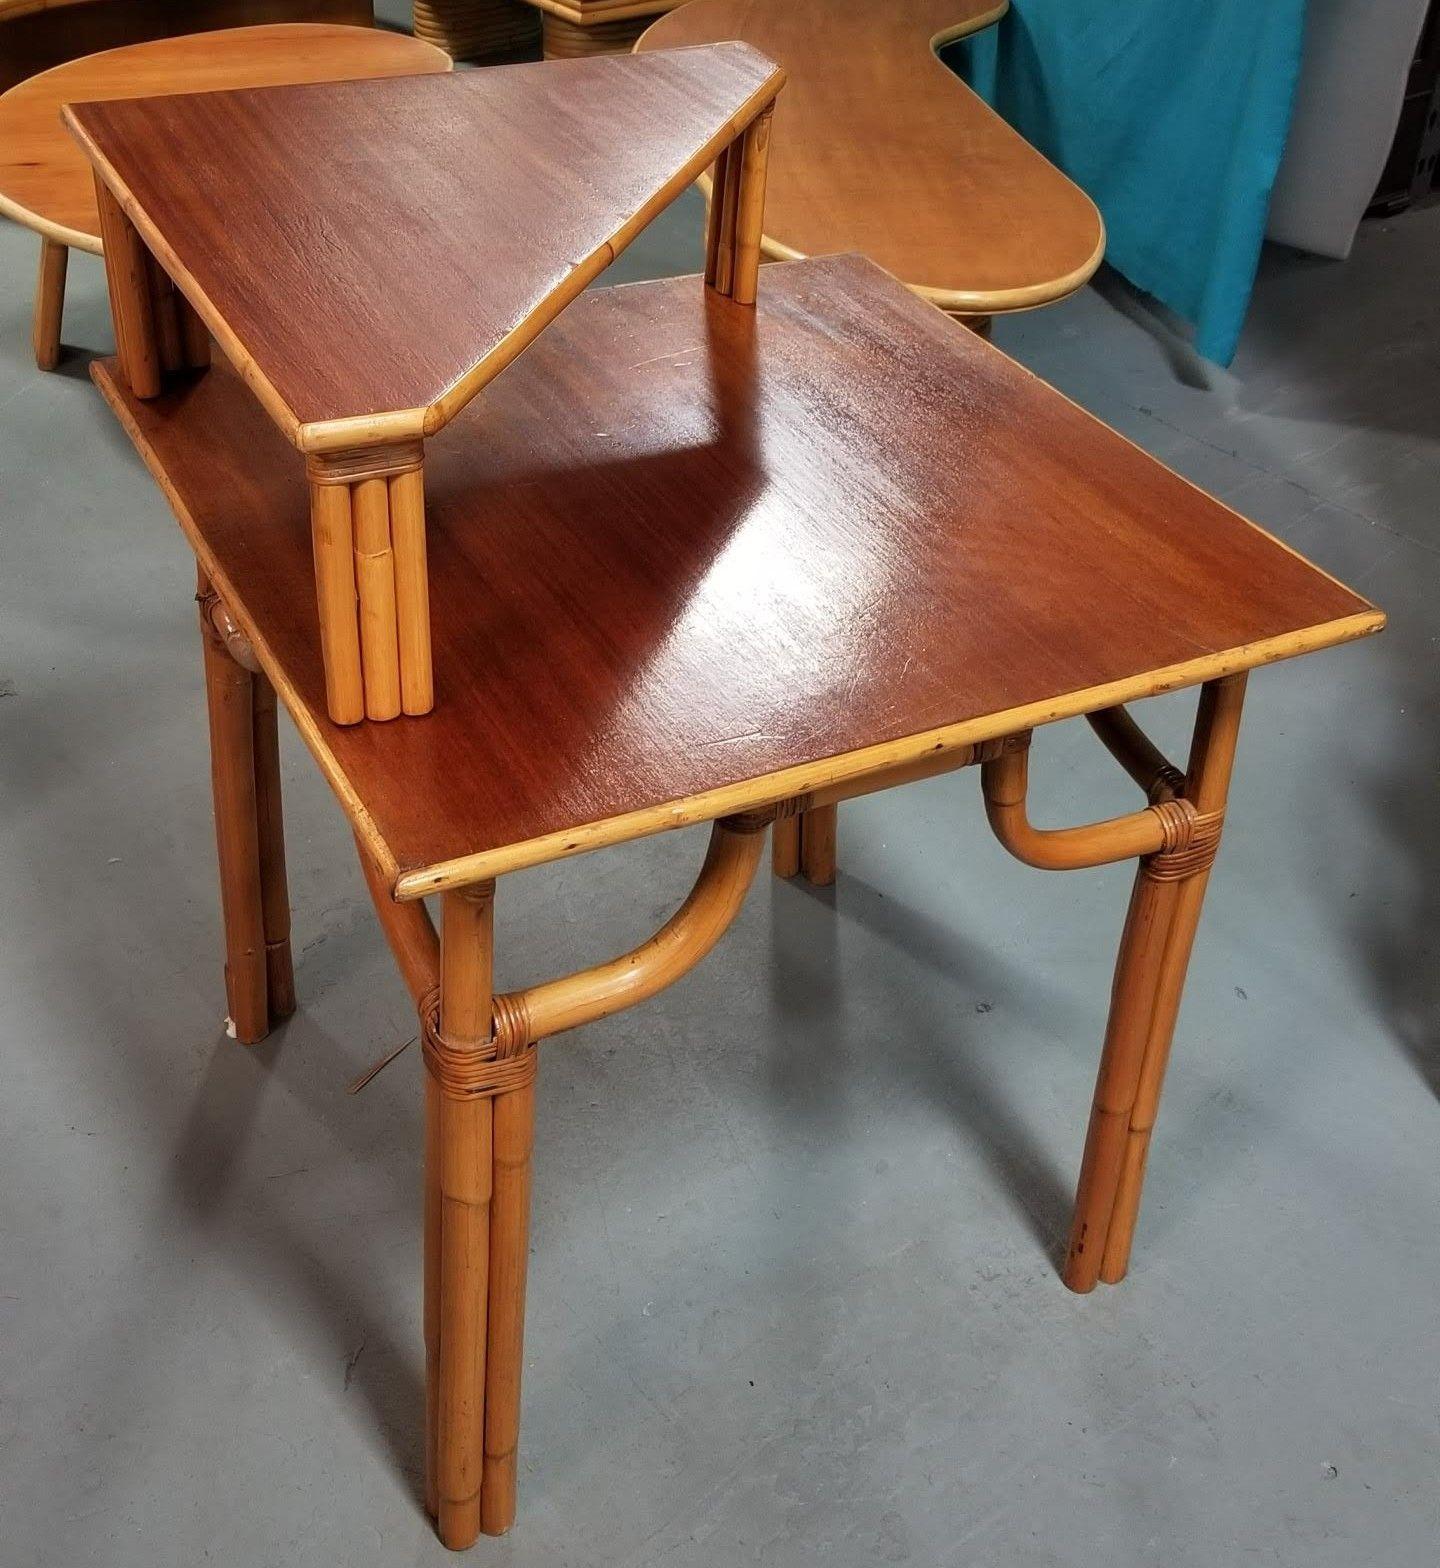 Restored Rattan 2-Tiered Corner Table or Desk In Good Condition For Sale In Van Nuys, CA